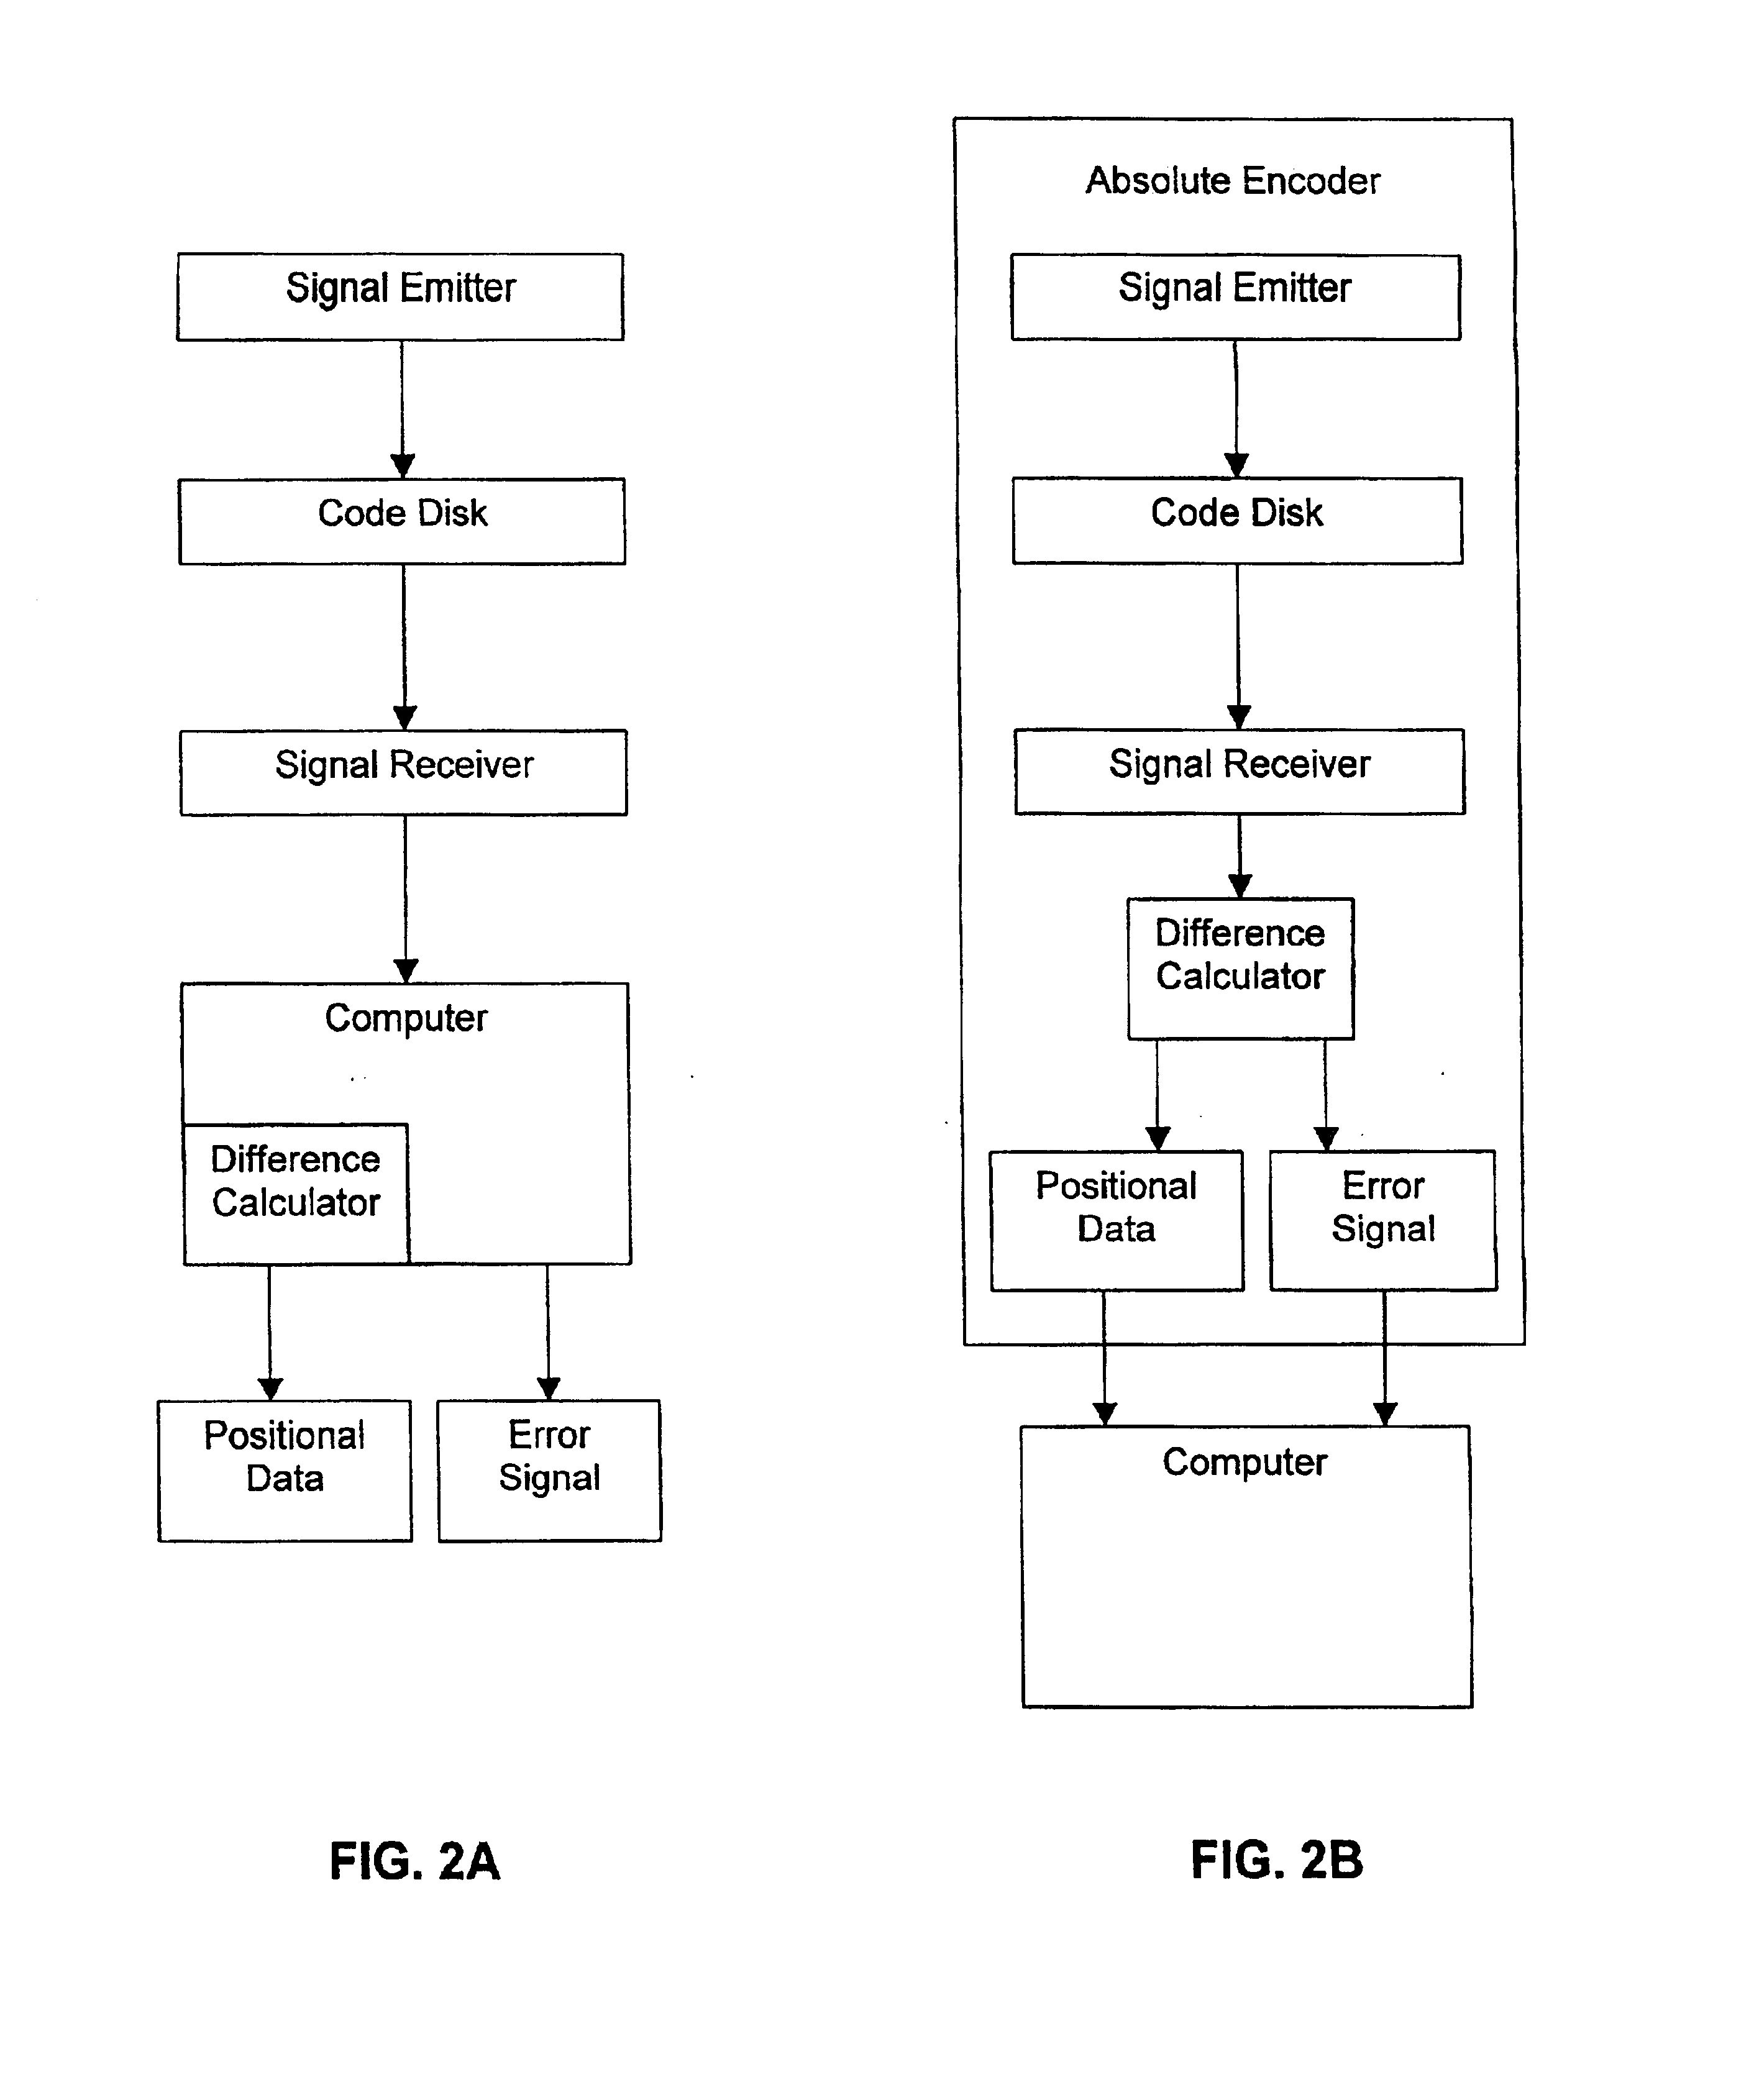 Apparatus and methods for monitoring encoder signals